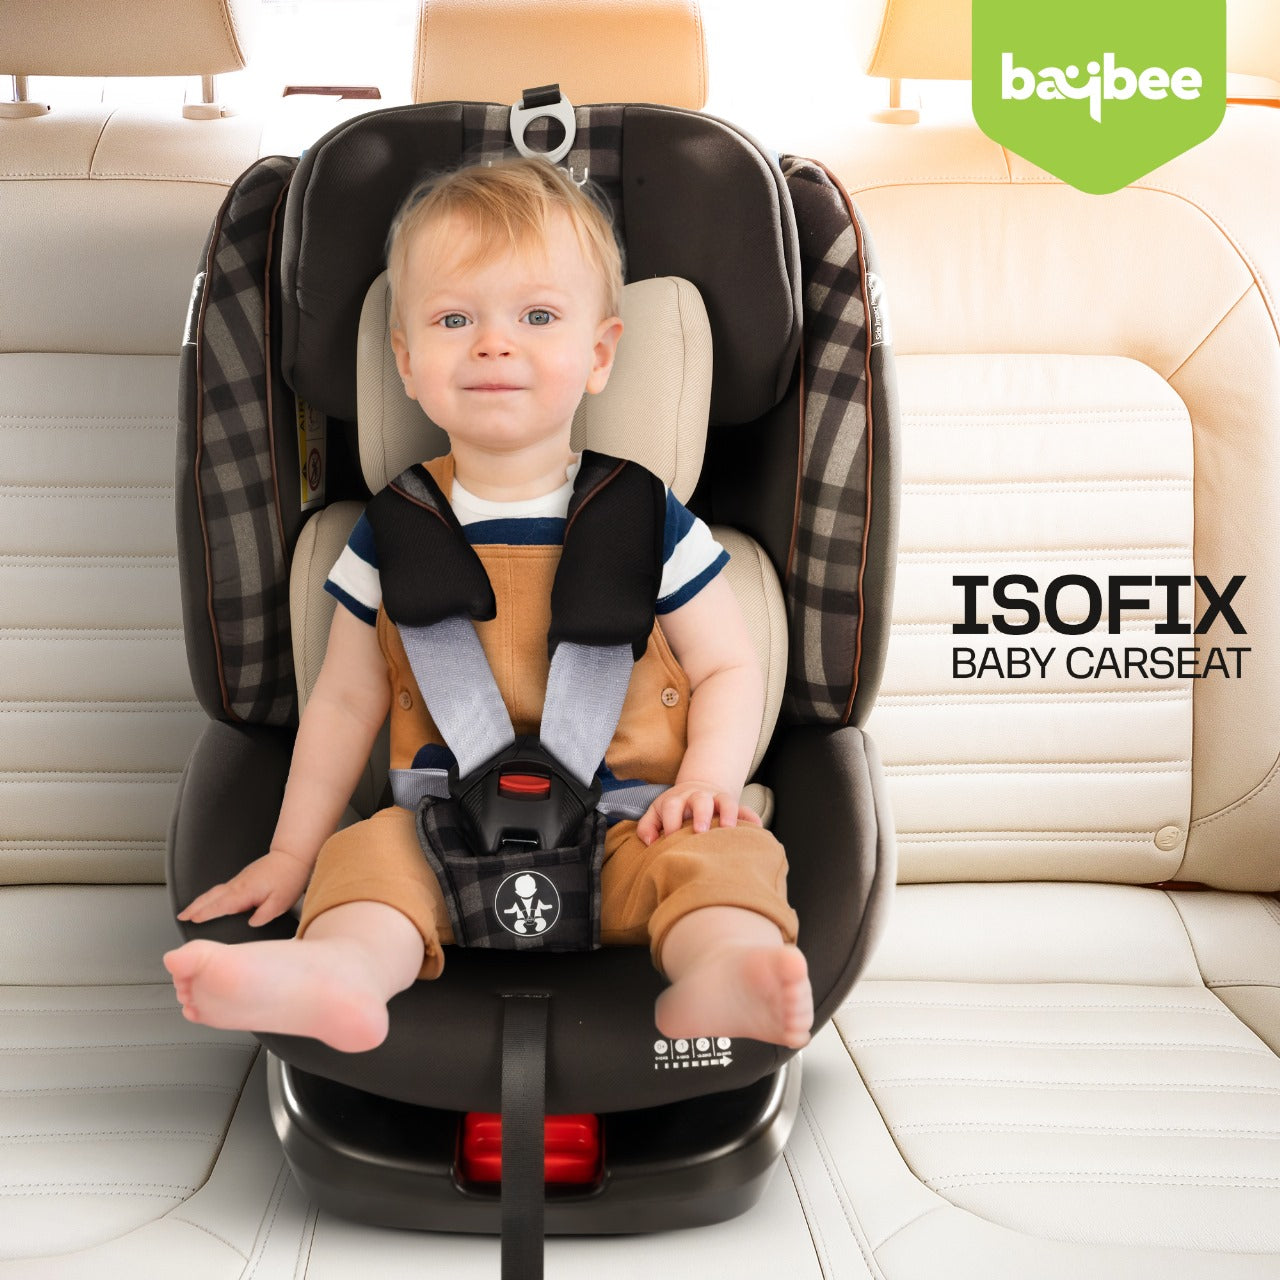 Burbay Luxe ISOFIX 360 Luxurious Rotatable Baby Car Seat Ergonomic Backrest | 0 Months to 12 Years